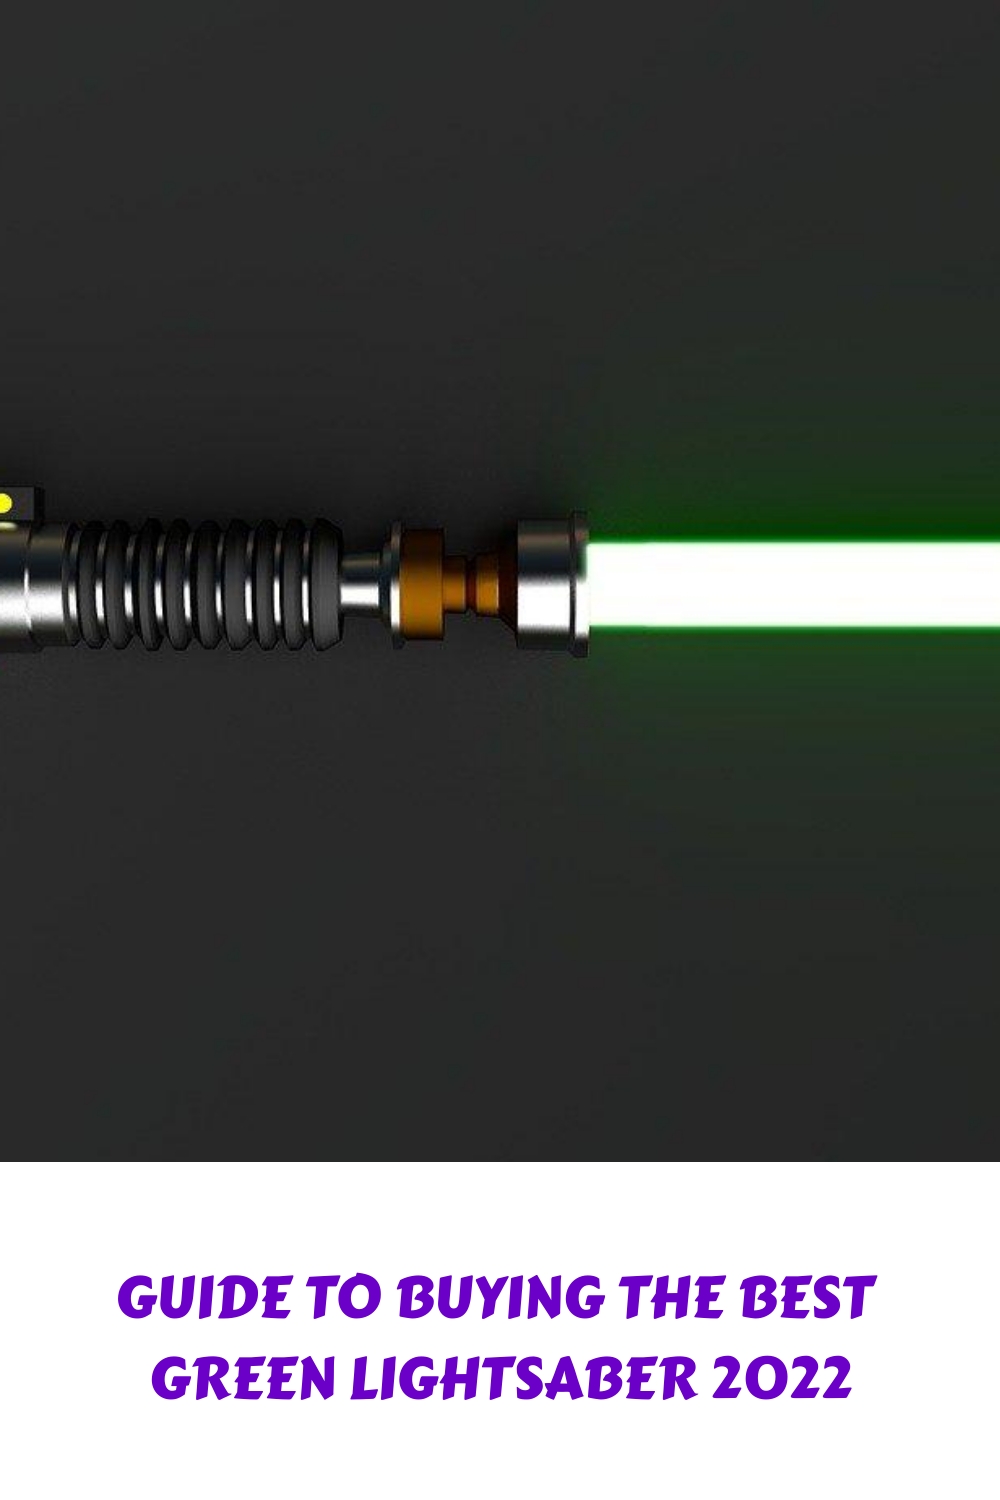 Guide To Buying The Best Green Lightsaber 2022 generated pin 57431